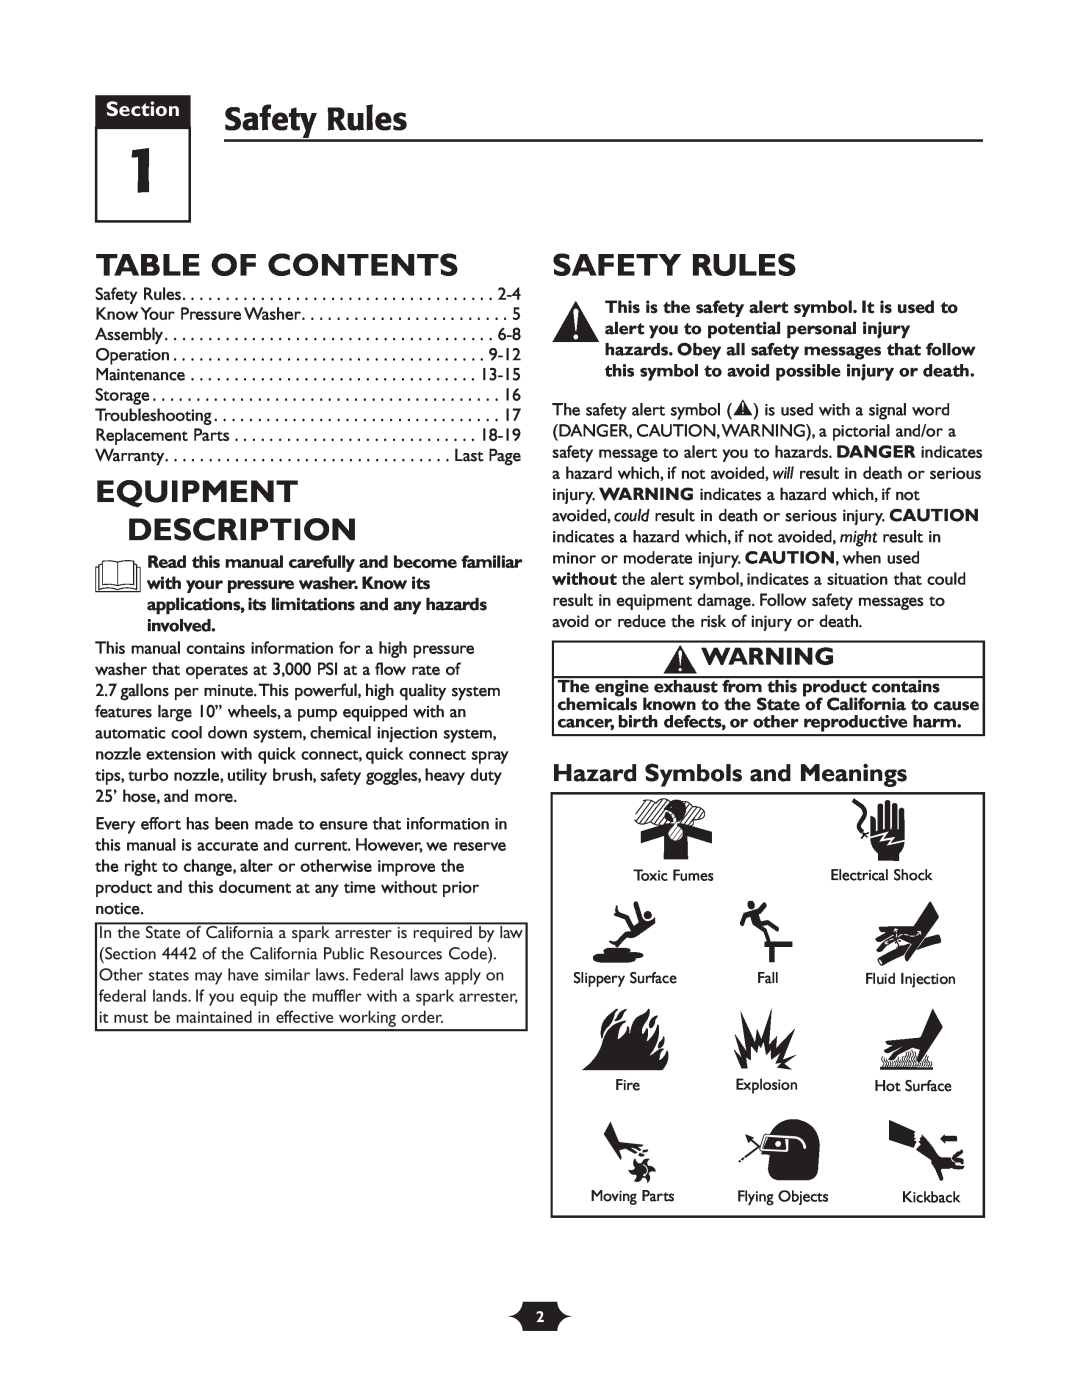 Briggs & Stratton 20209 Safety Rules, Table Of Contents, Equipment Description, Hazard Symbols and Meanings, Section 